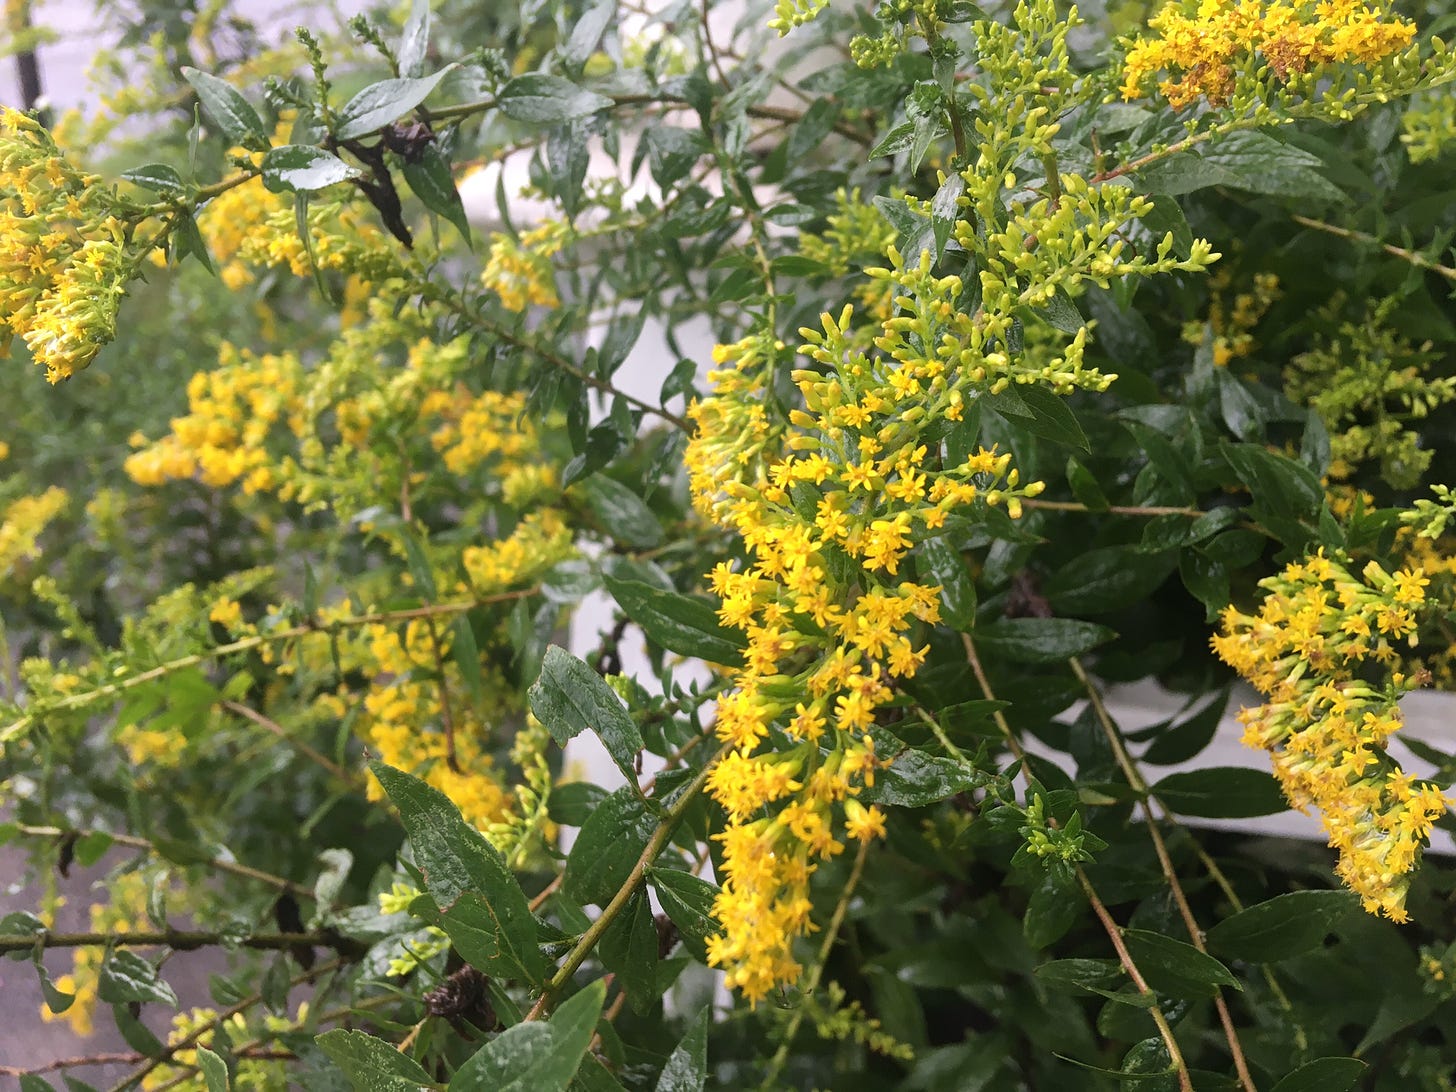 Narrow sprigs of goldenrod flowers and dark green leaves